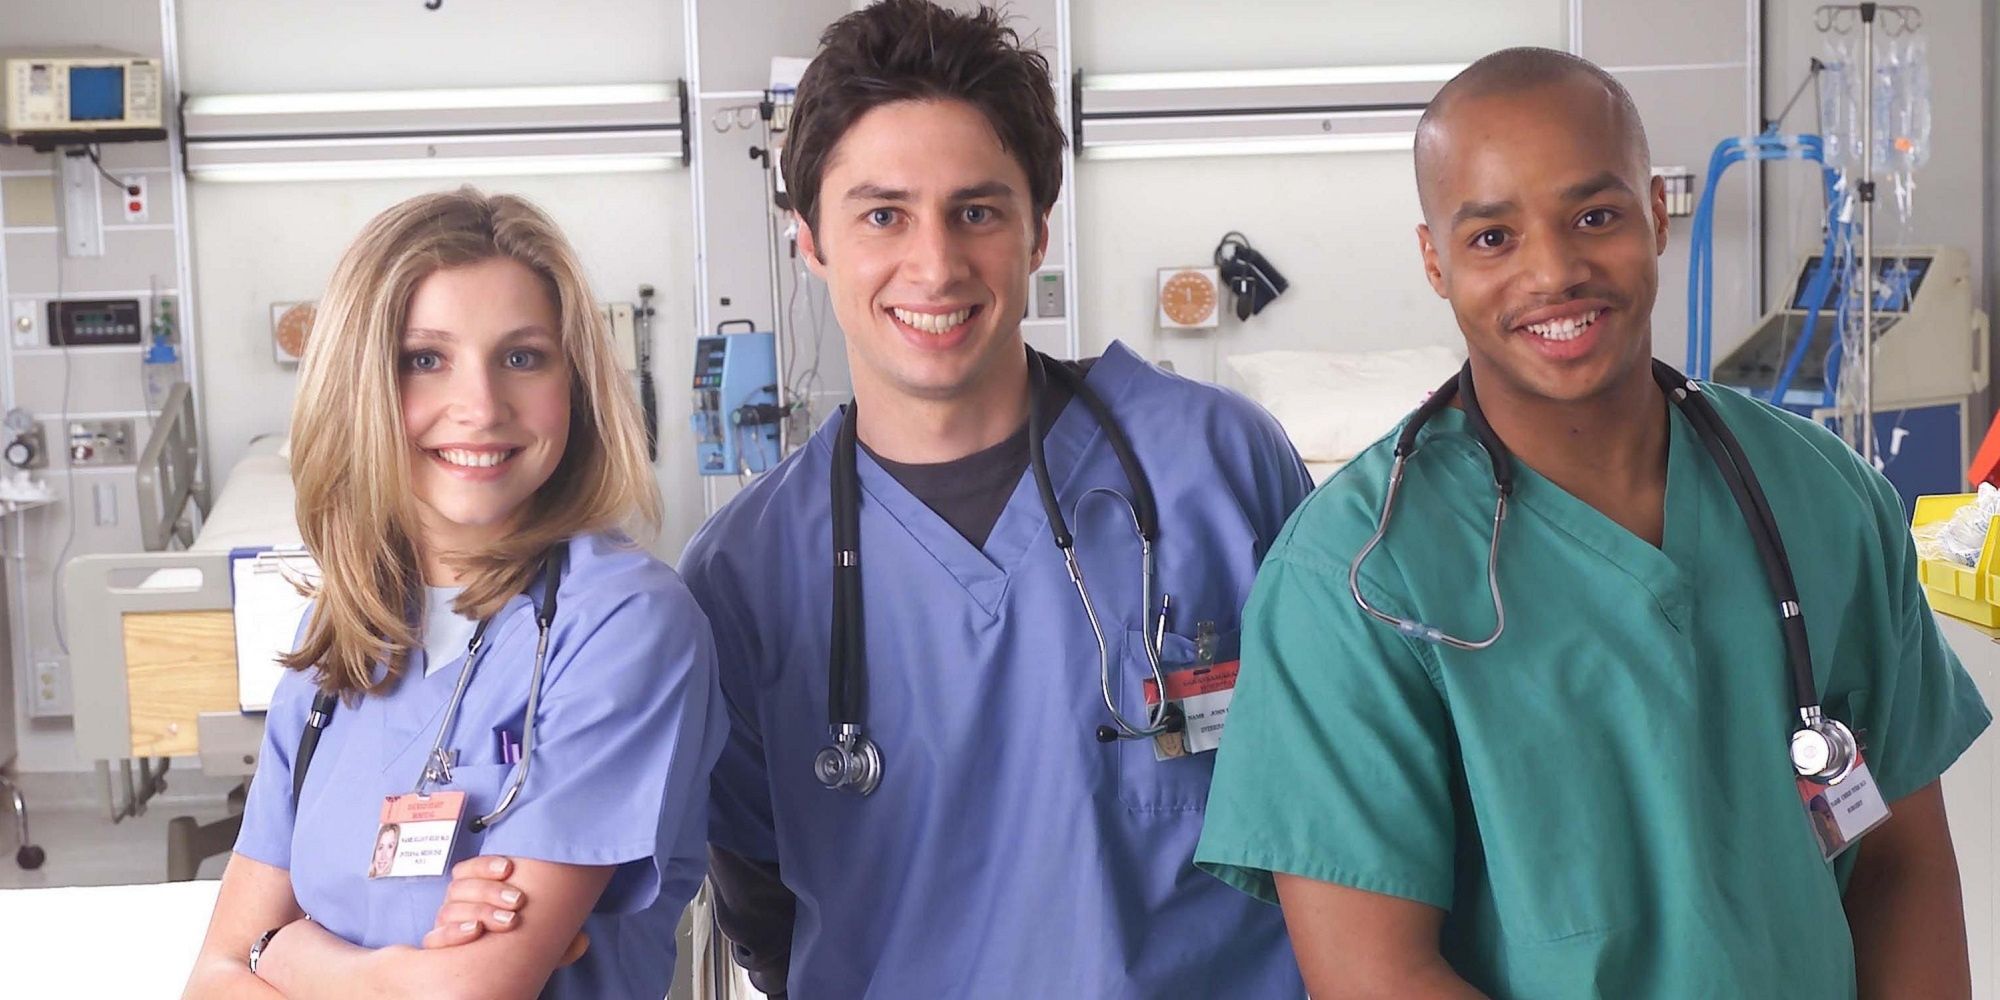 Elliot JD and Turk smiles for a photo in Scrubs Cropped